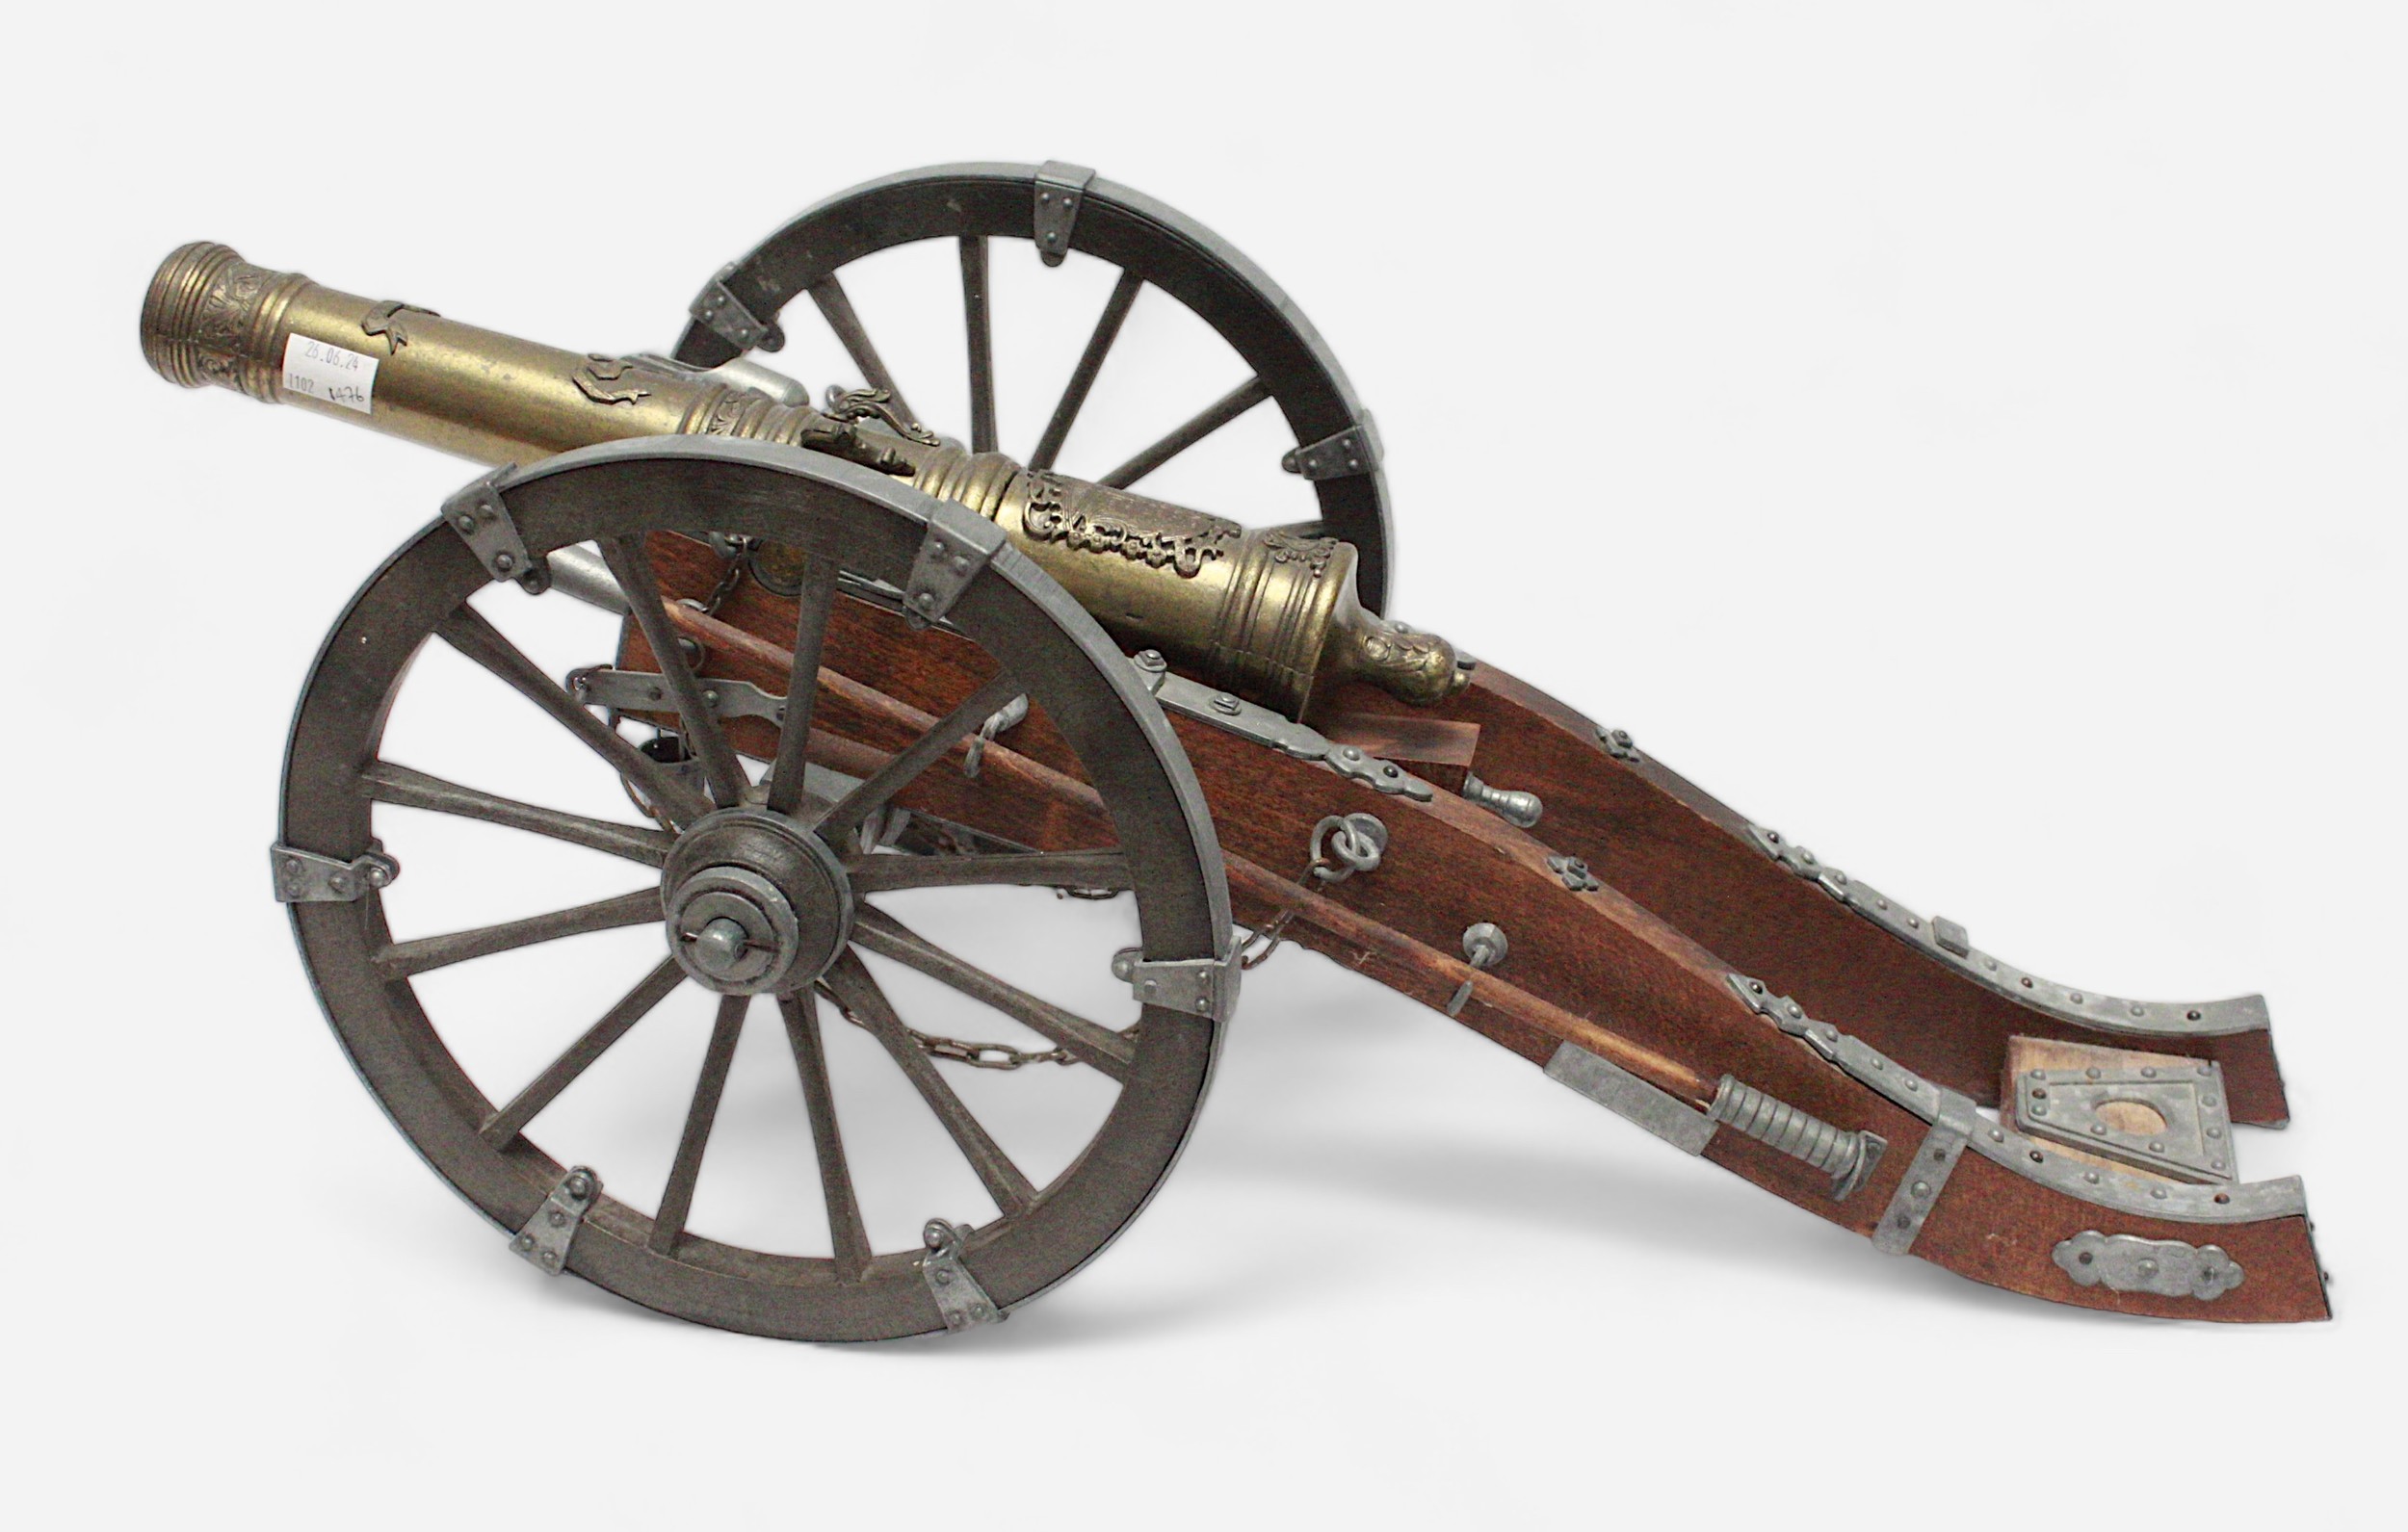 A scale model of a 19th Century French Muzzle-Loading Cannon, on two wheel carriage with loading and